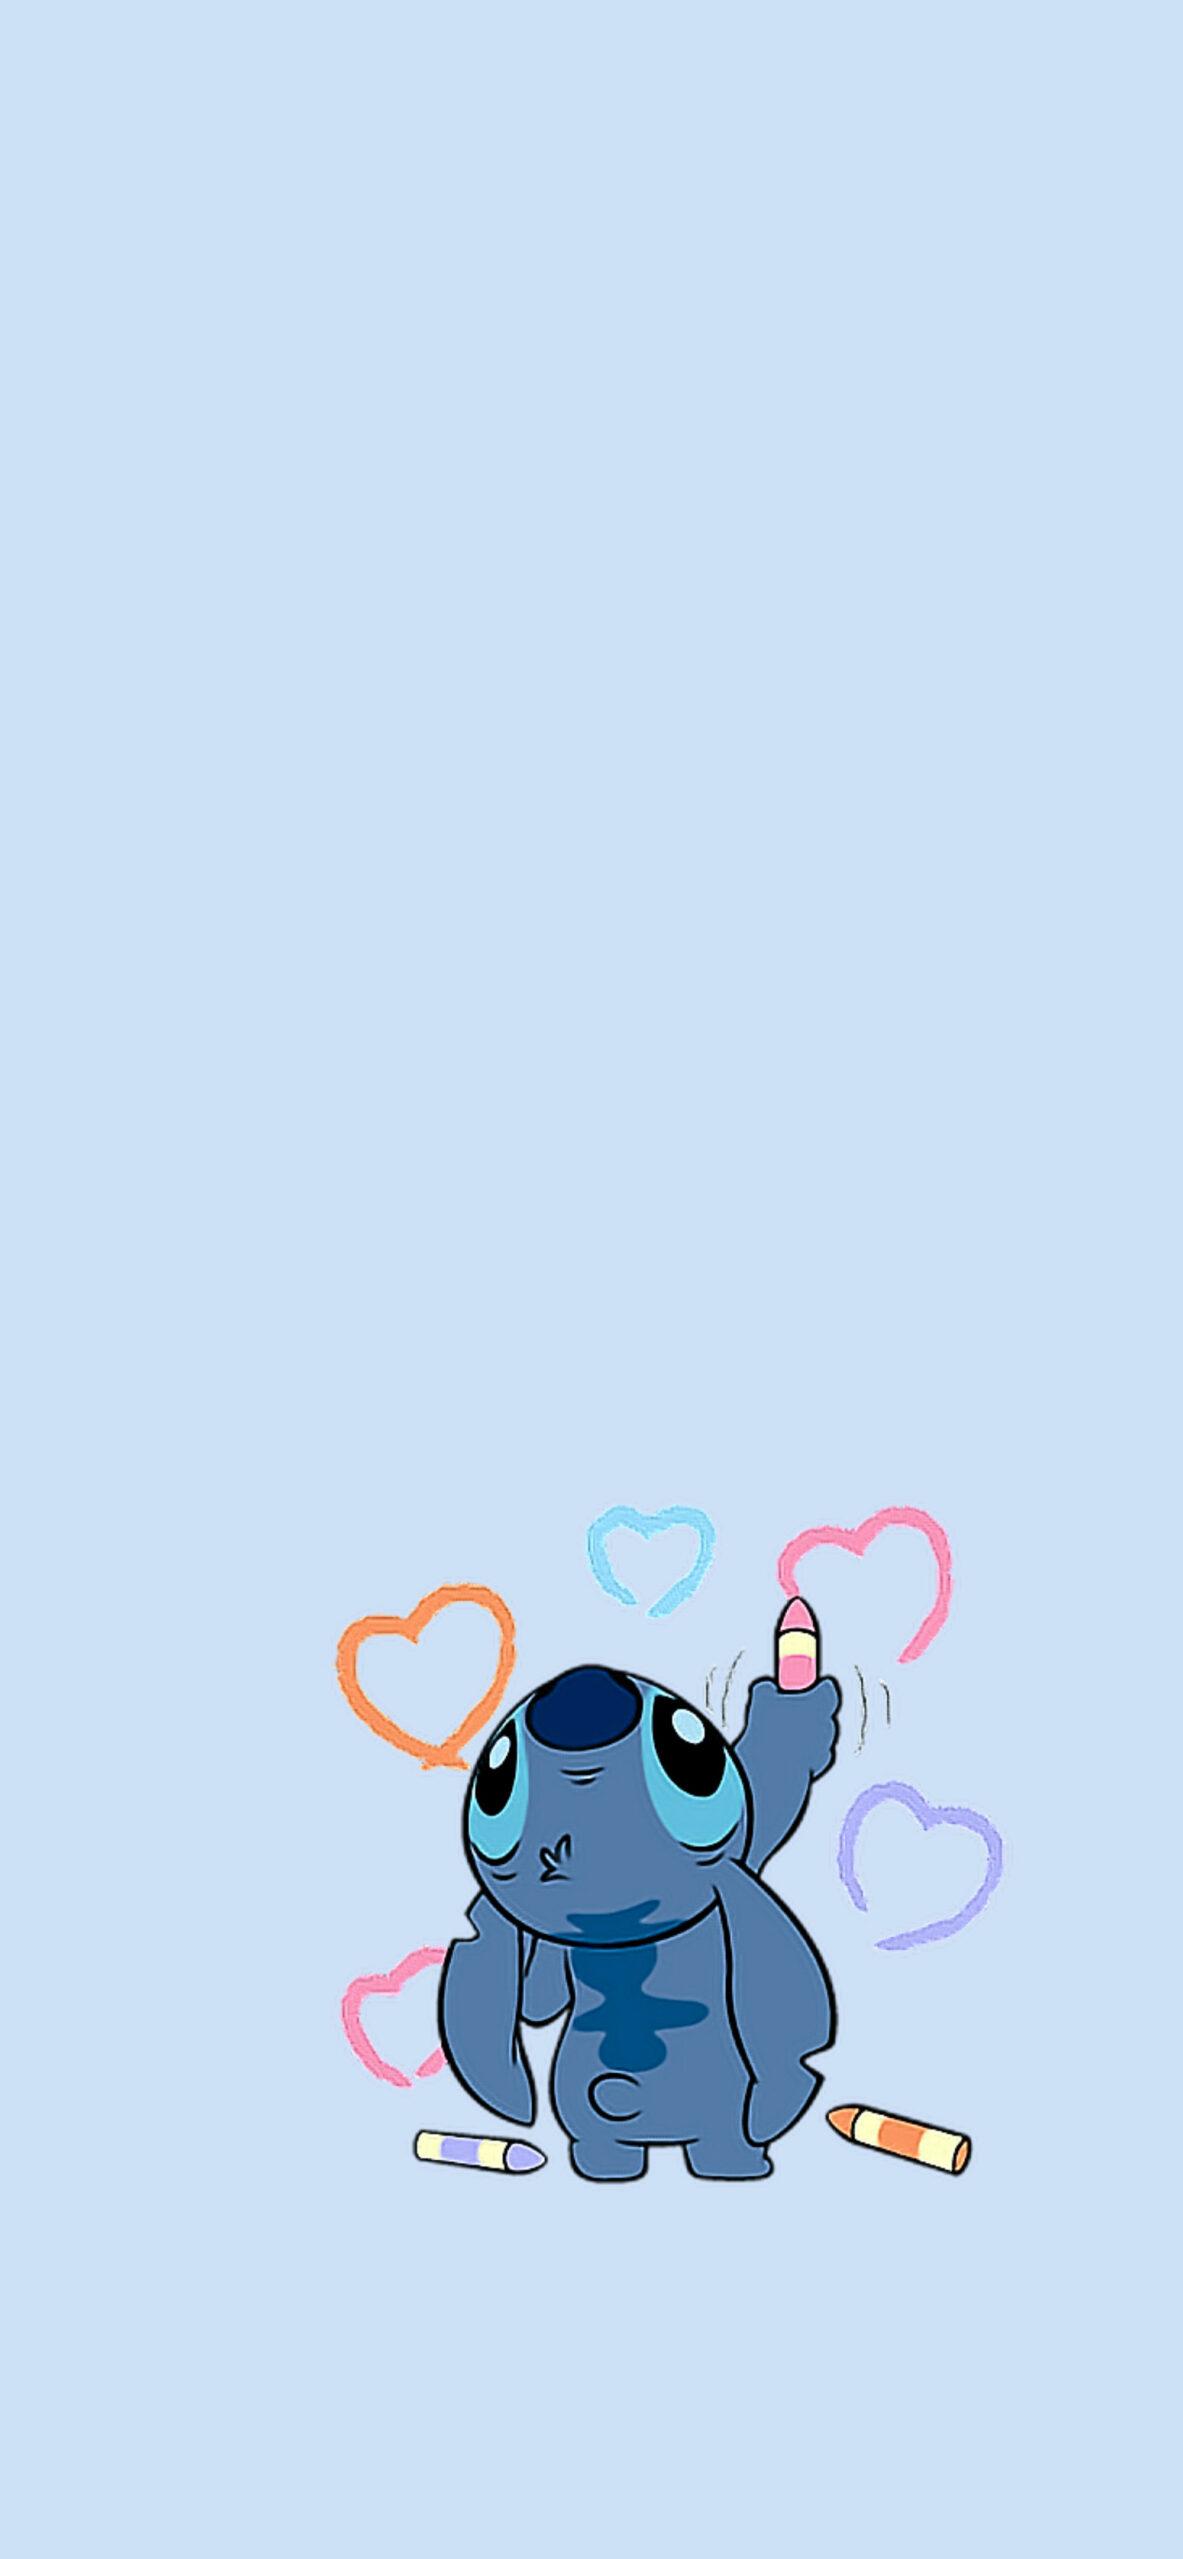 Stitch Drawing Blue Wallpaper Cool For iPhone